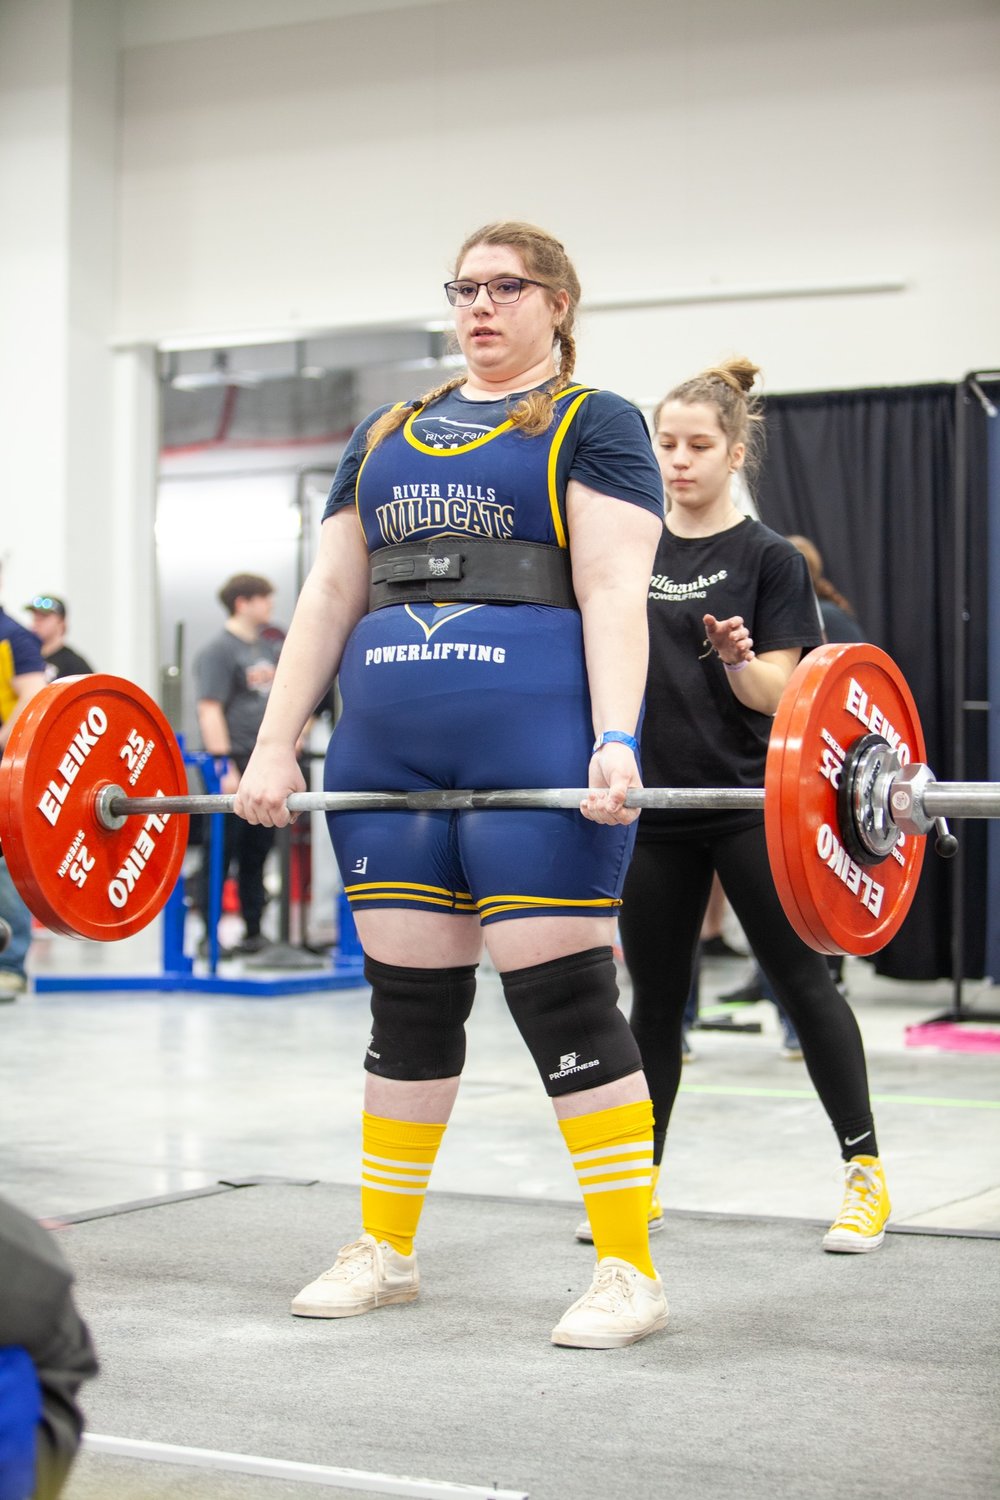 A River Falls High School powerlifter competes in the deadlift portion during a tournament earlier this season. The River Falls powerlifting team is a coed club that features nearly 70 student-athletes ranging in age from sixth grade to senior.